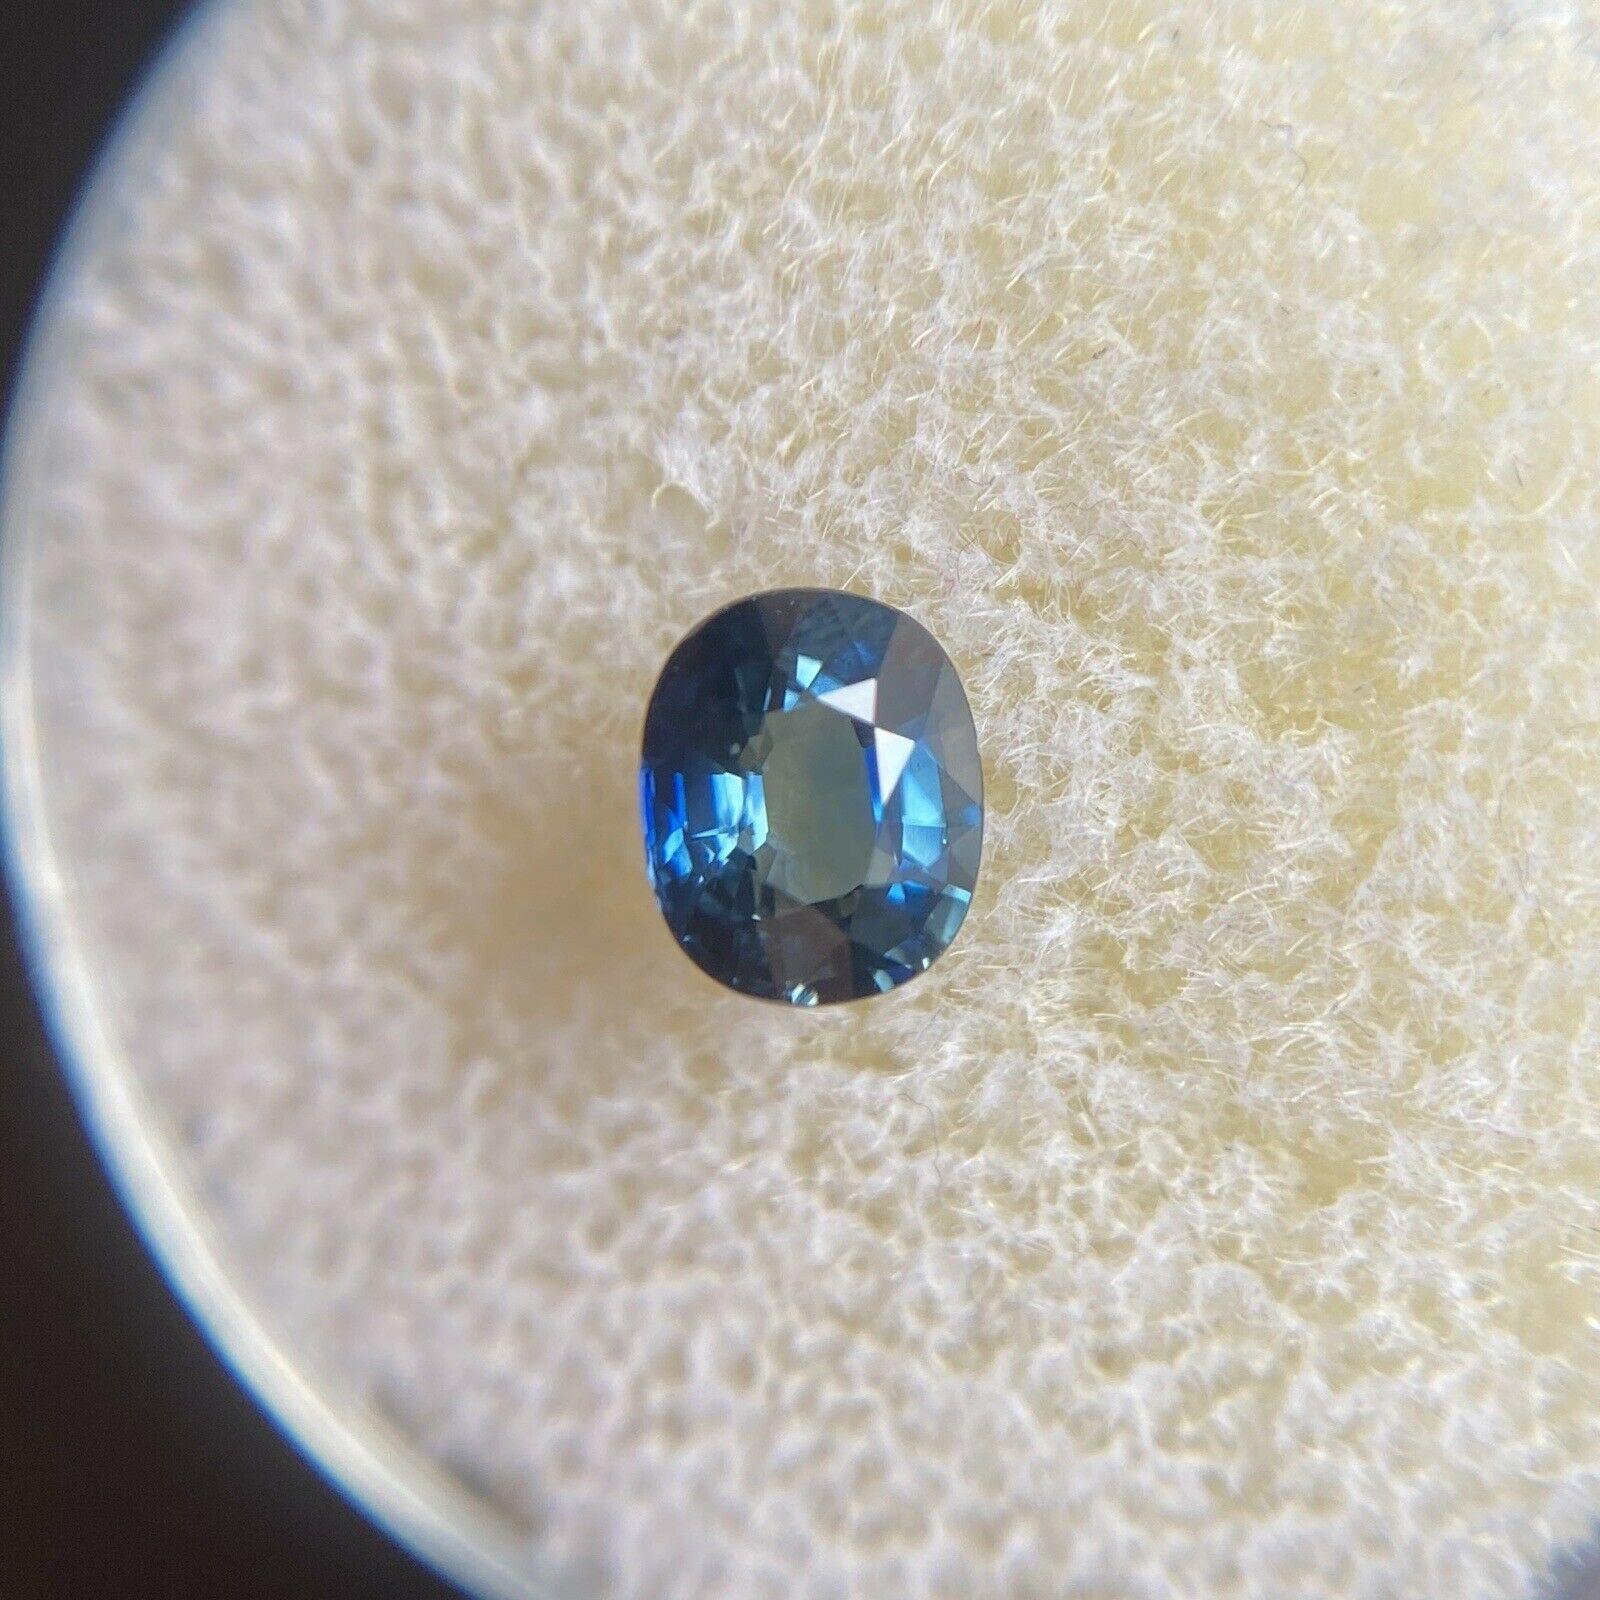 Fine Deep Royal Blue Australia Sapphire 0.77ct Oval Cut Rare Loose Gem 5.5x4.5mm

Fine Royal Blue Australian Sapphire Gemstone. 
0.77 Carat with a beautiful deep royal blue colour and excellent clarity, a very clean stone. Also has an excellent oval